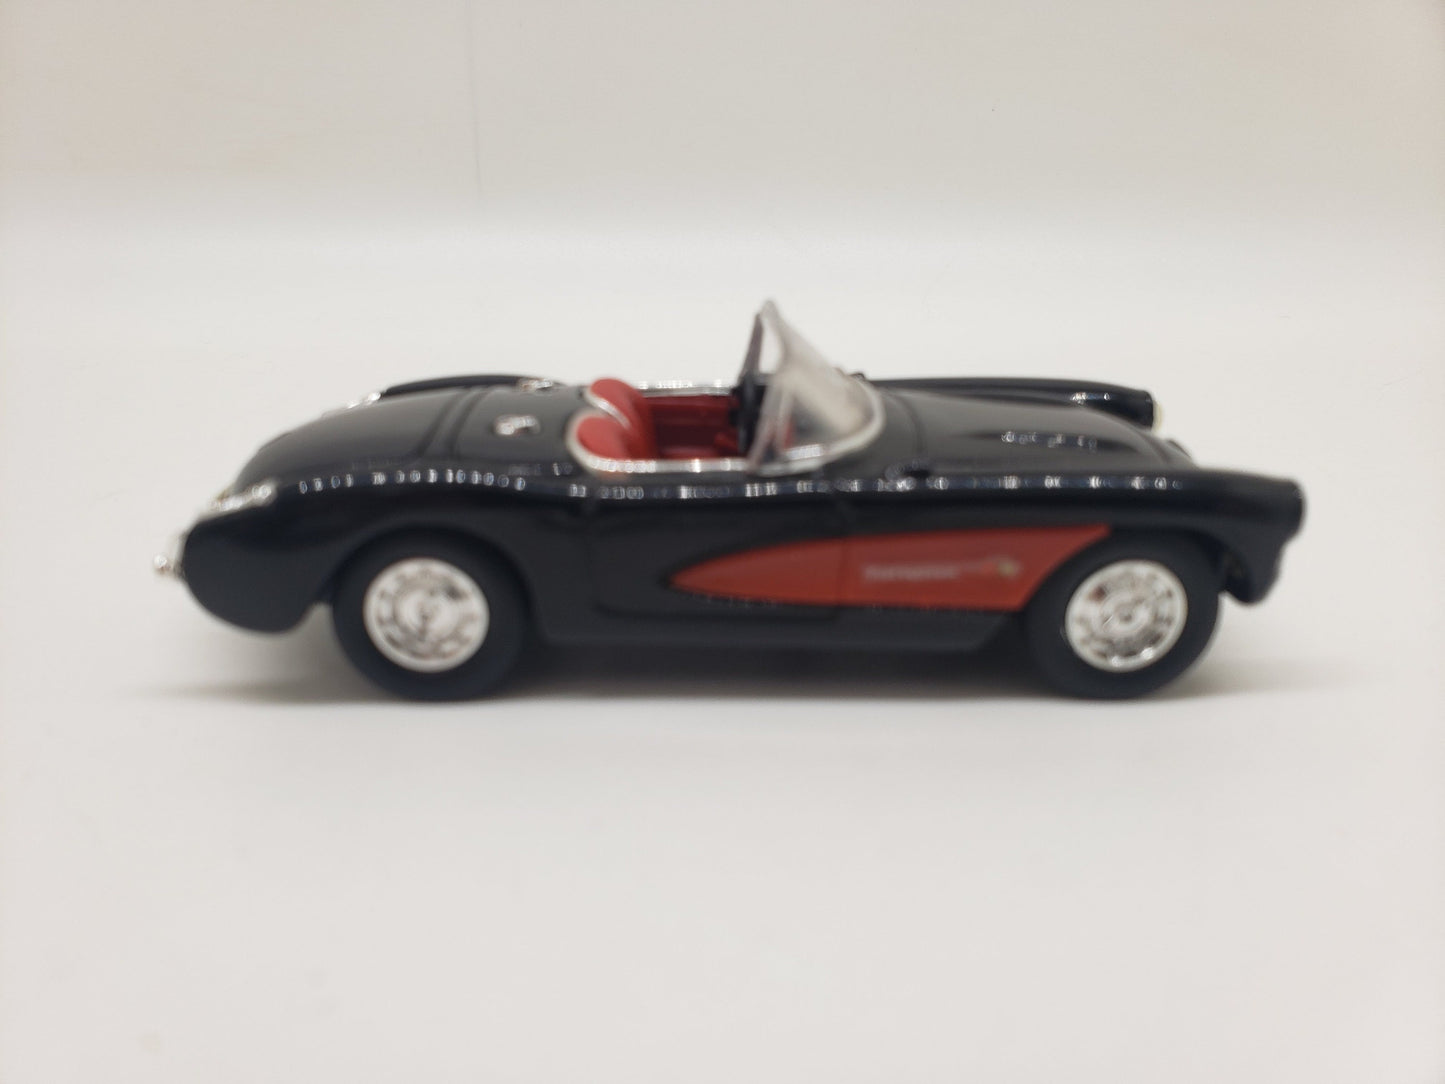 1957 Chevrolet Corvette Convertible Black Road Signature Collectable 1:43 Scale Miniature Model Toy Car Perfect Birthday Gift